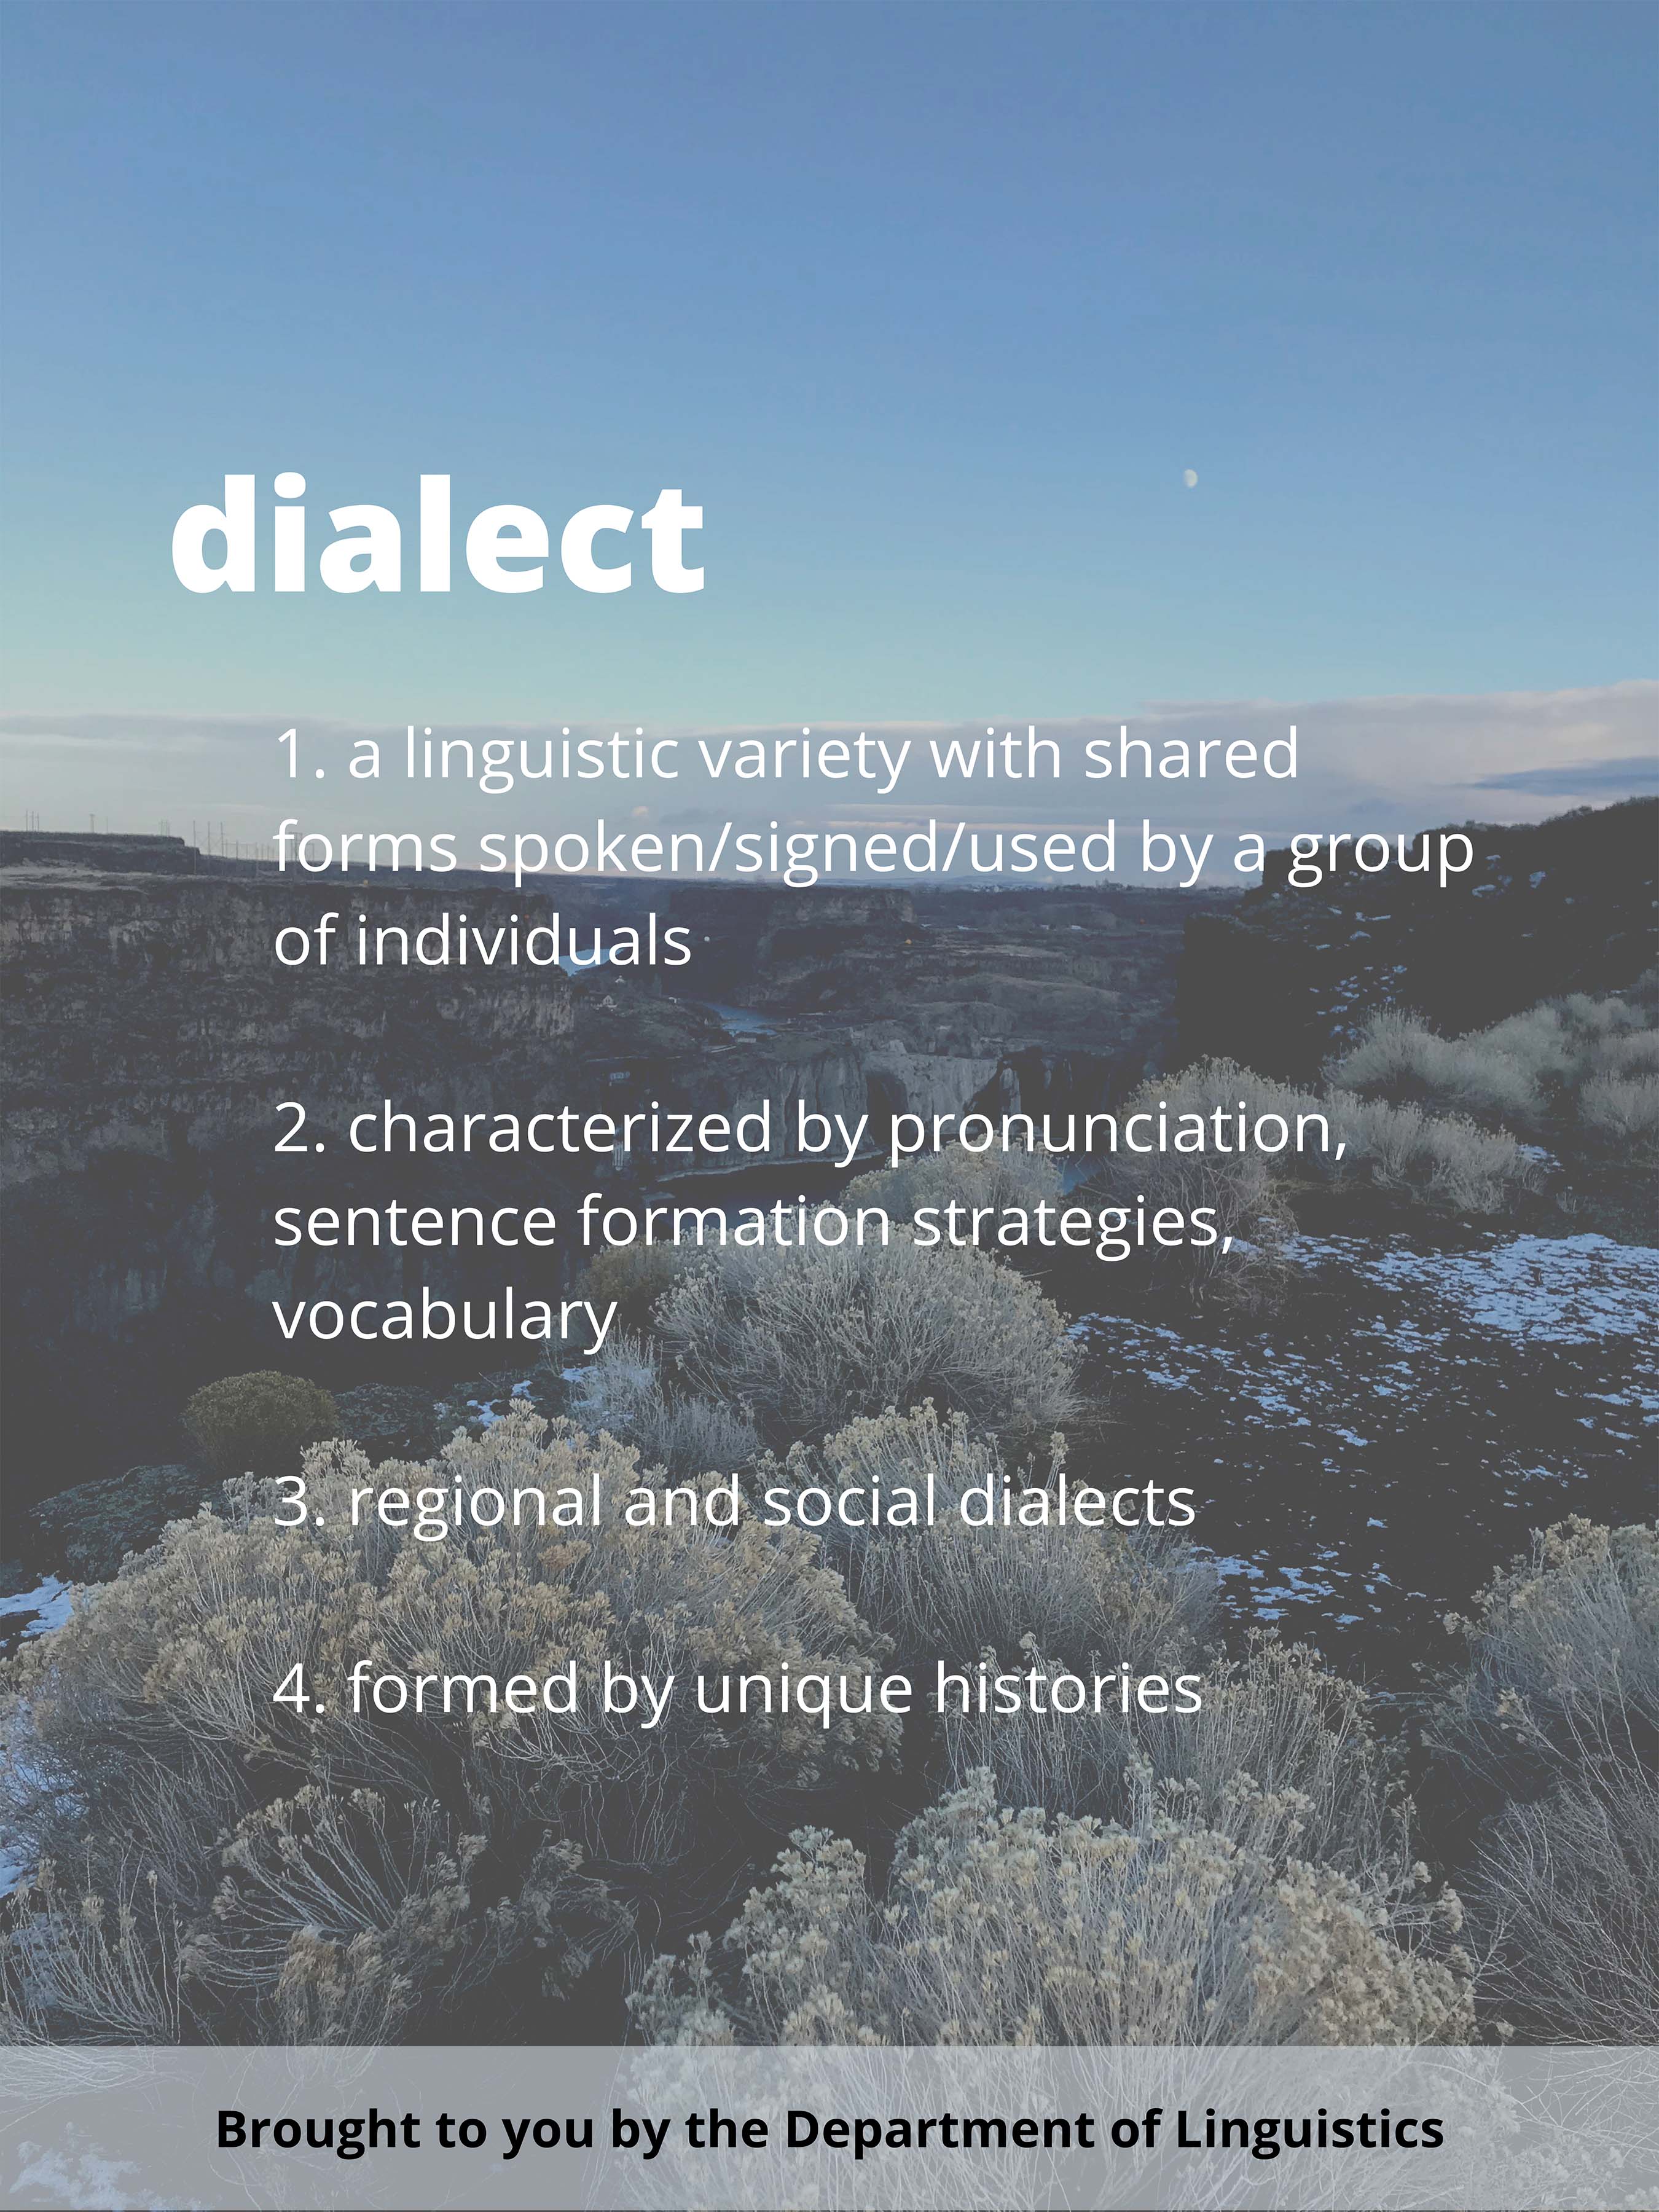 Definition of 'dialct.' Click on image to see full description.